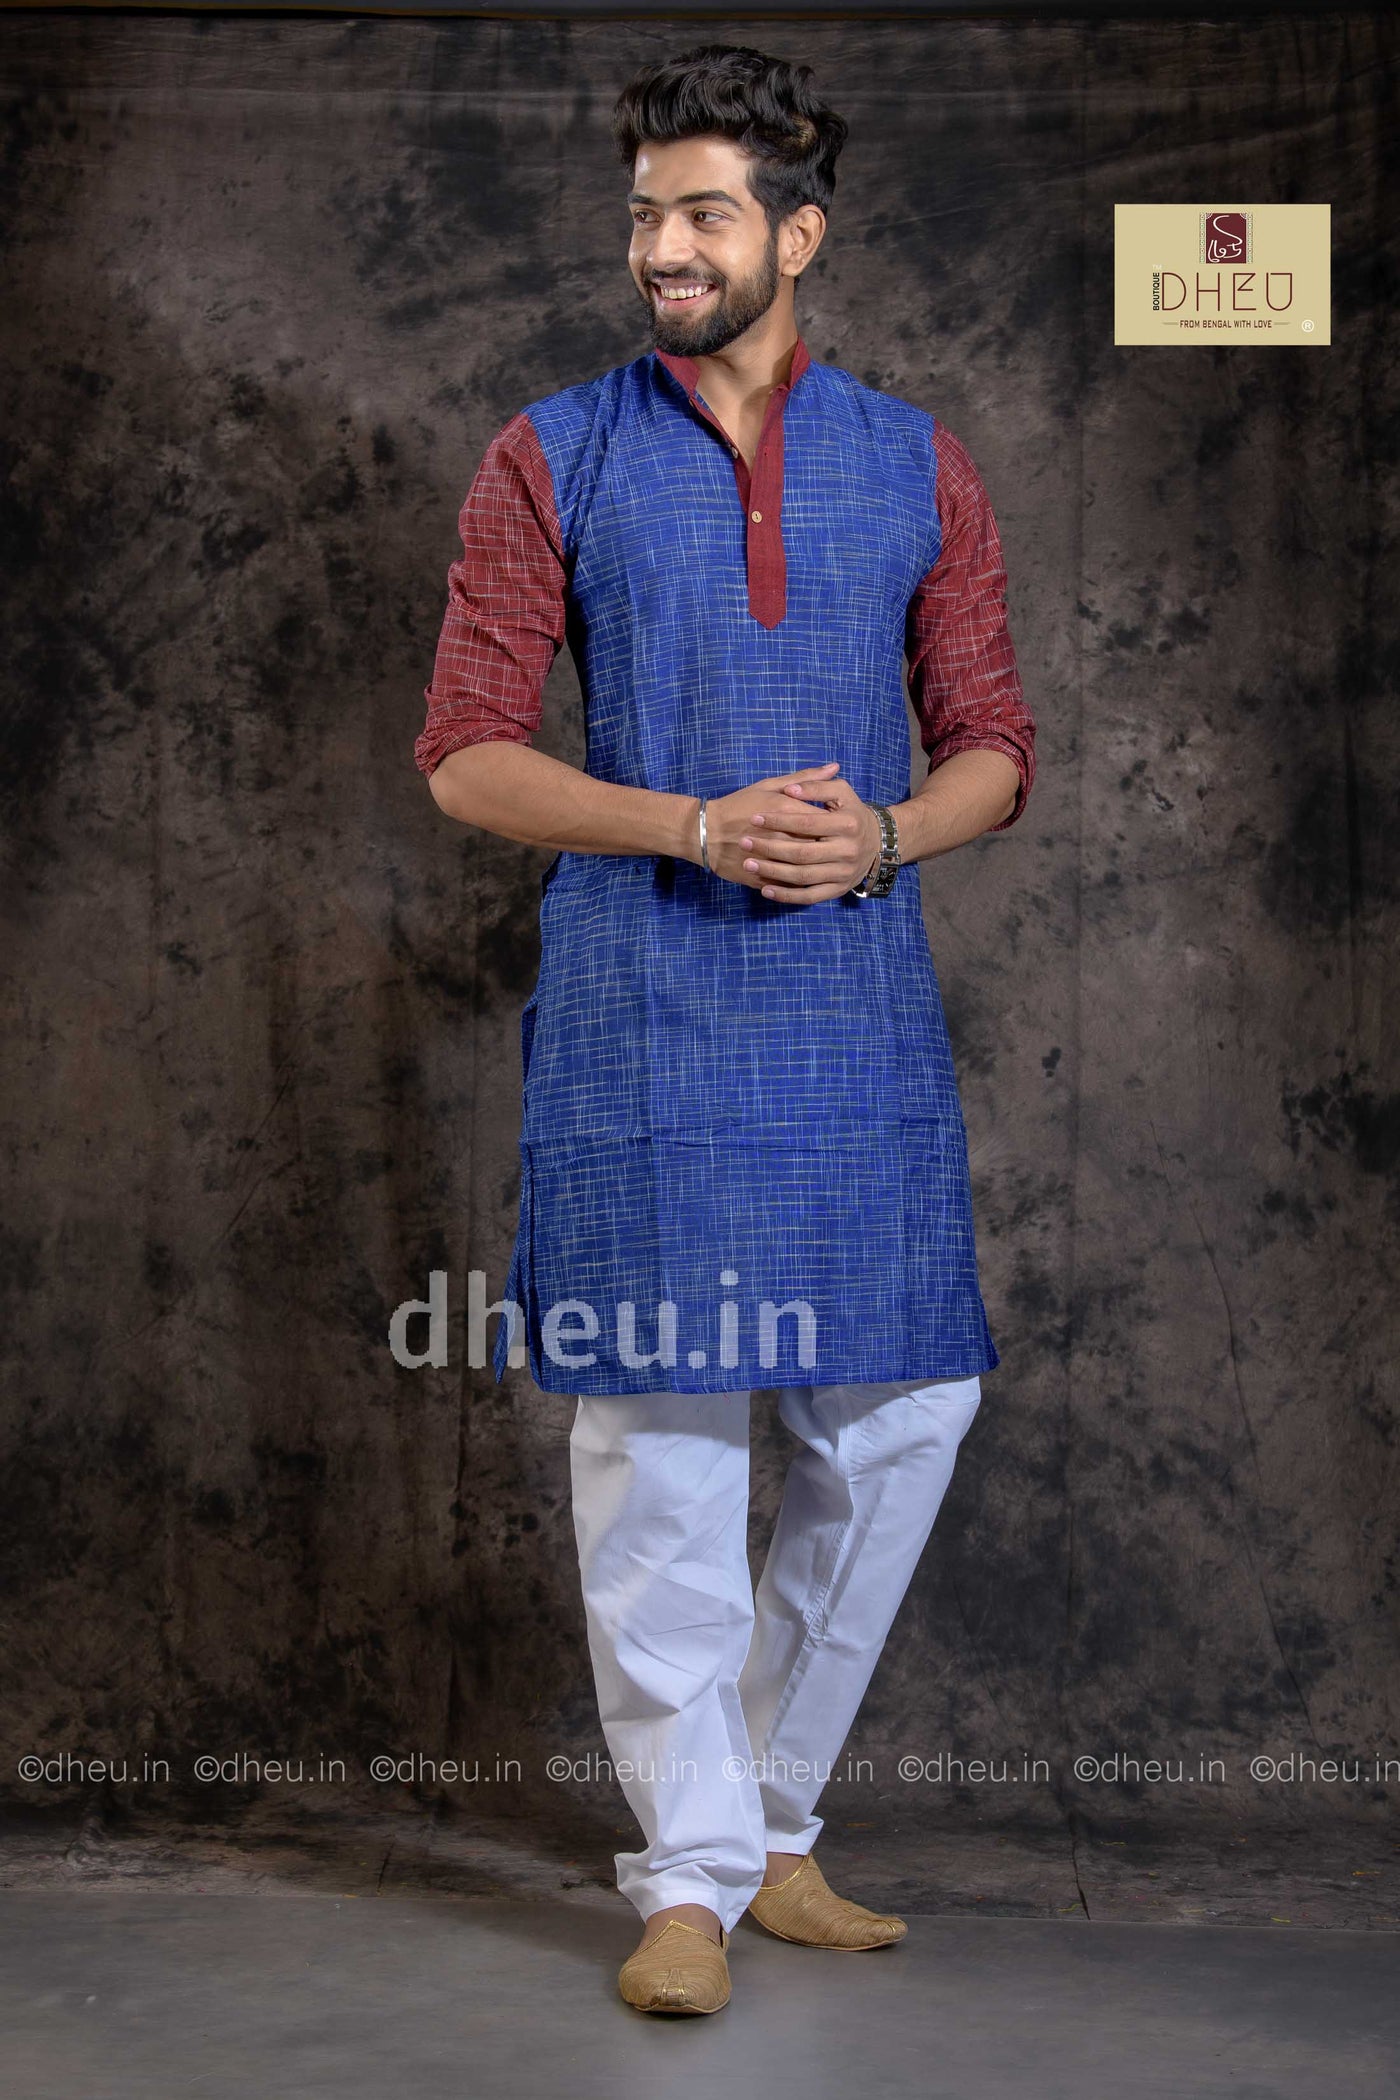 Vibrant blue designer kurta at low cost in dheu.in